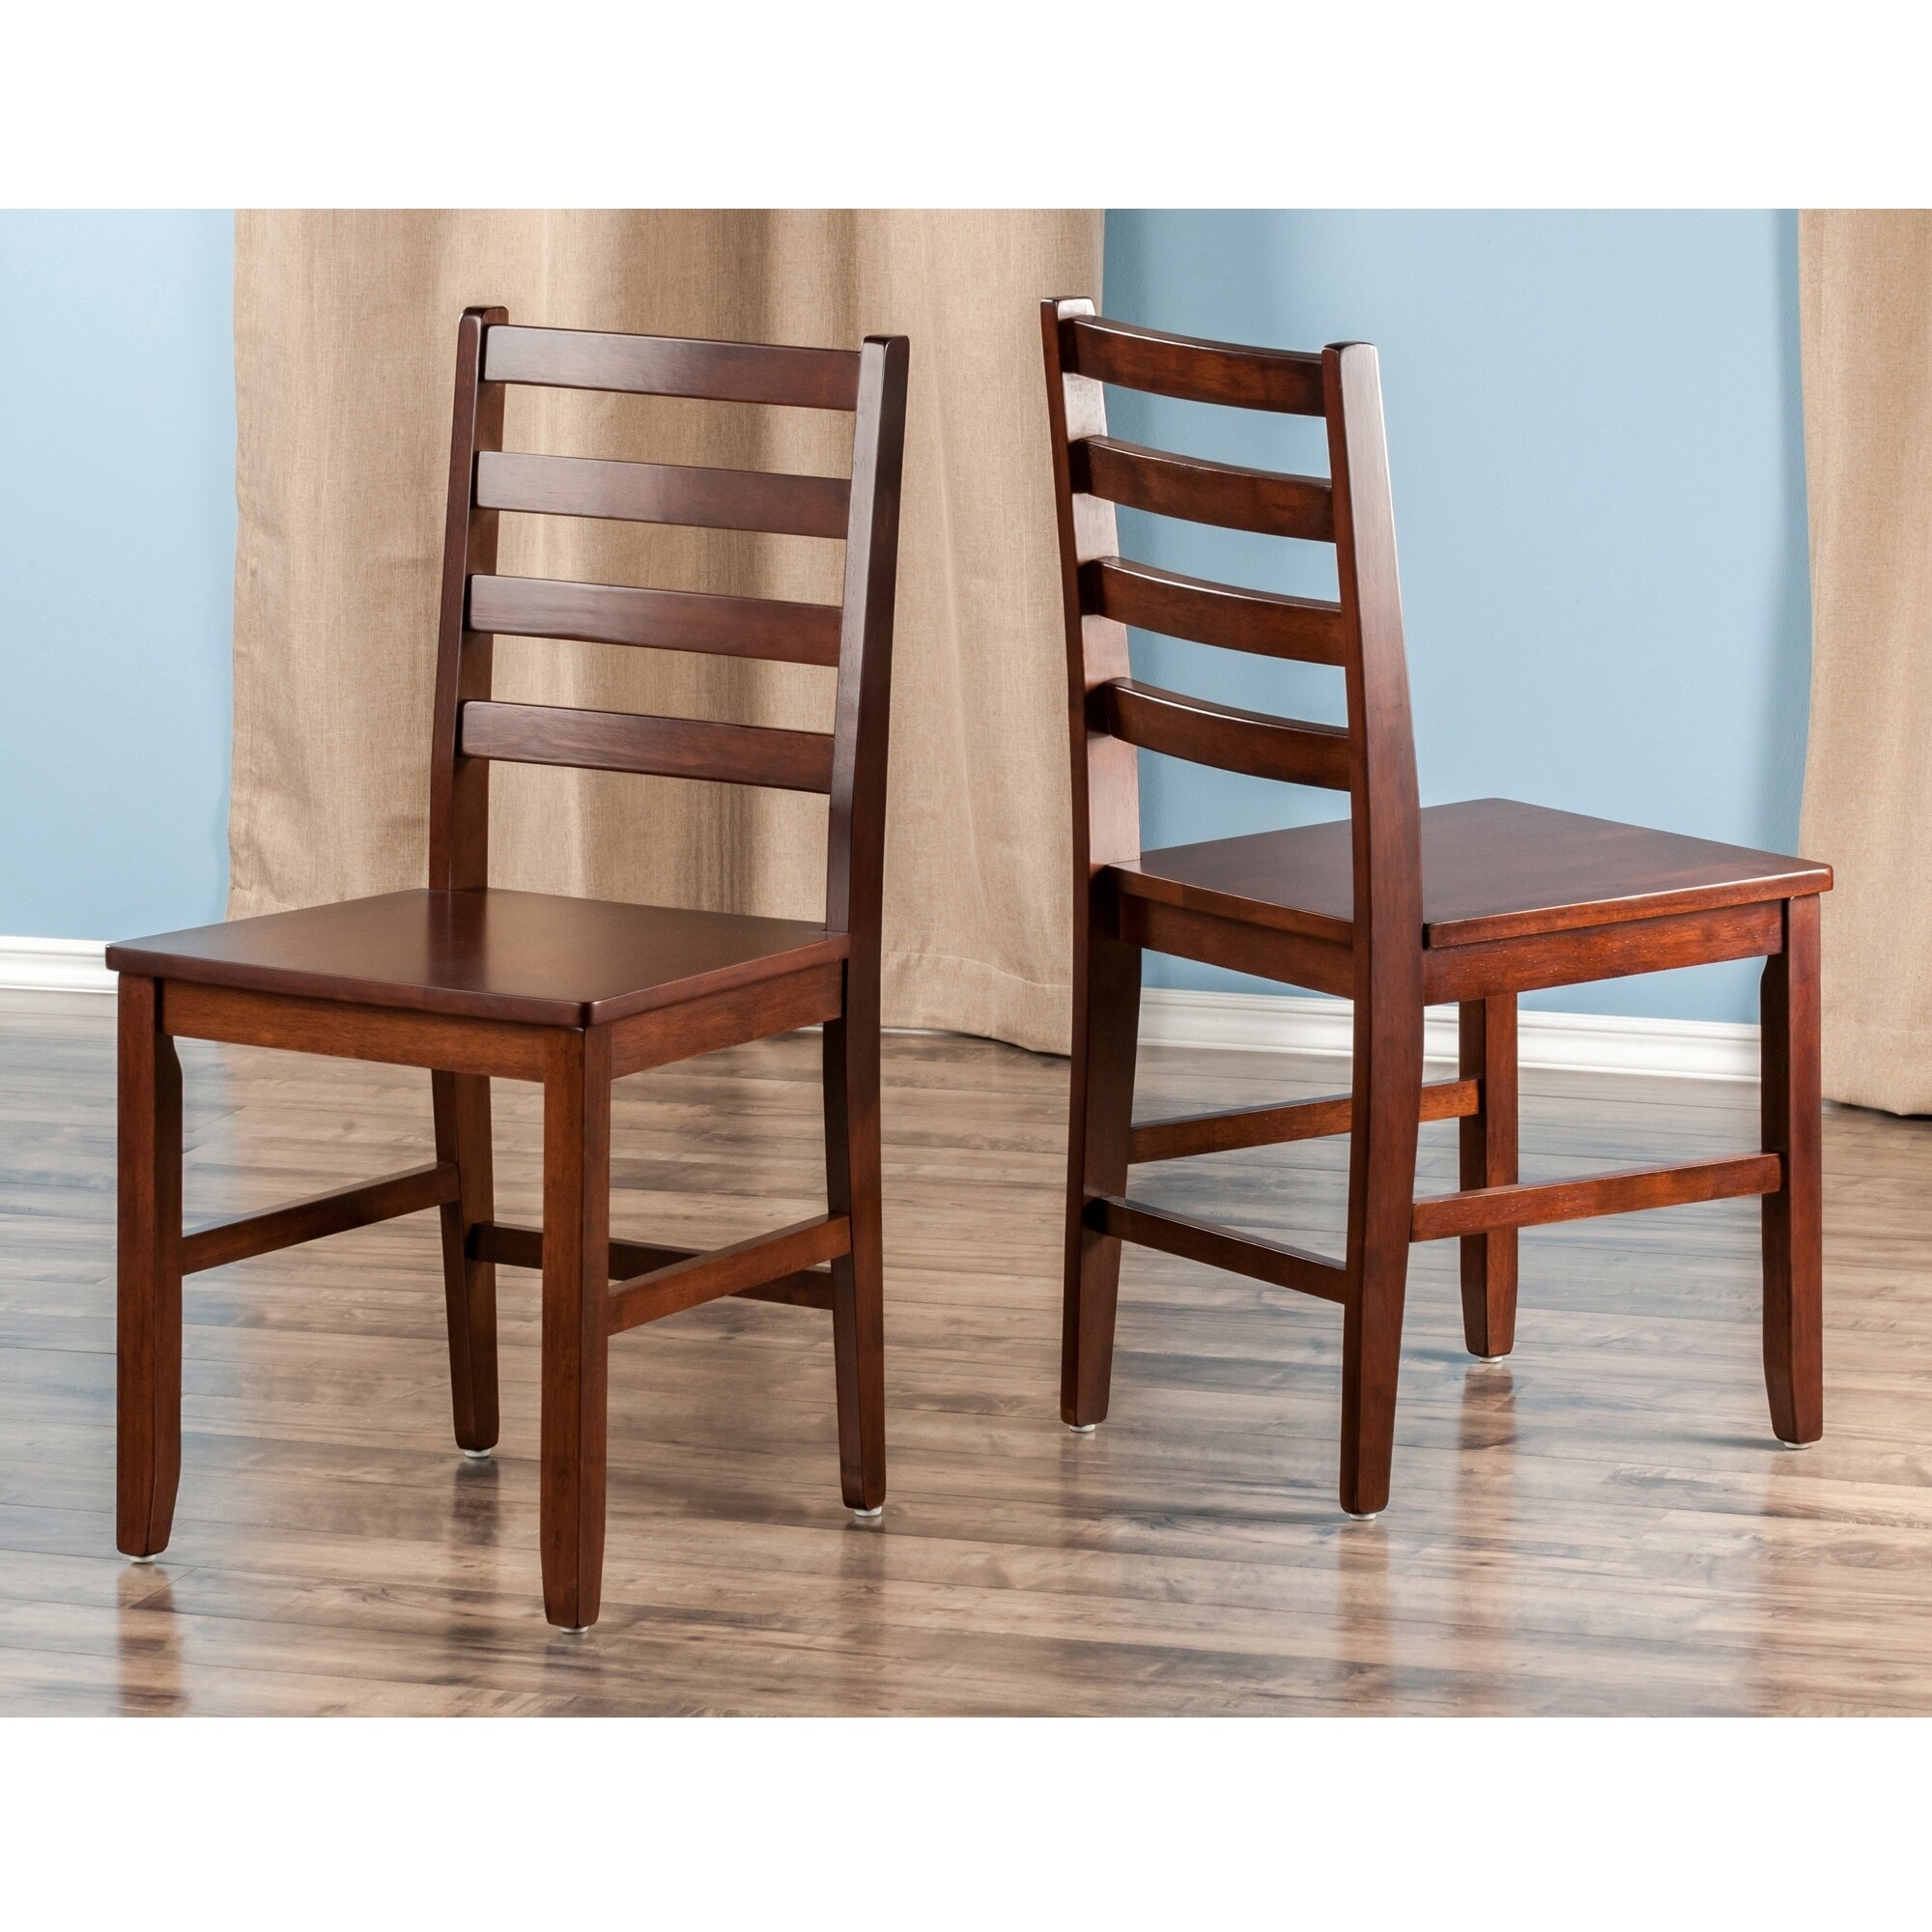 Hamilton 5-Pc Drop Leaf Dining Table with 4 Ladder Back Chairs